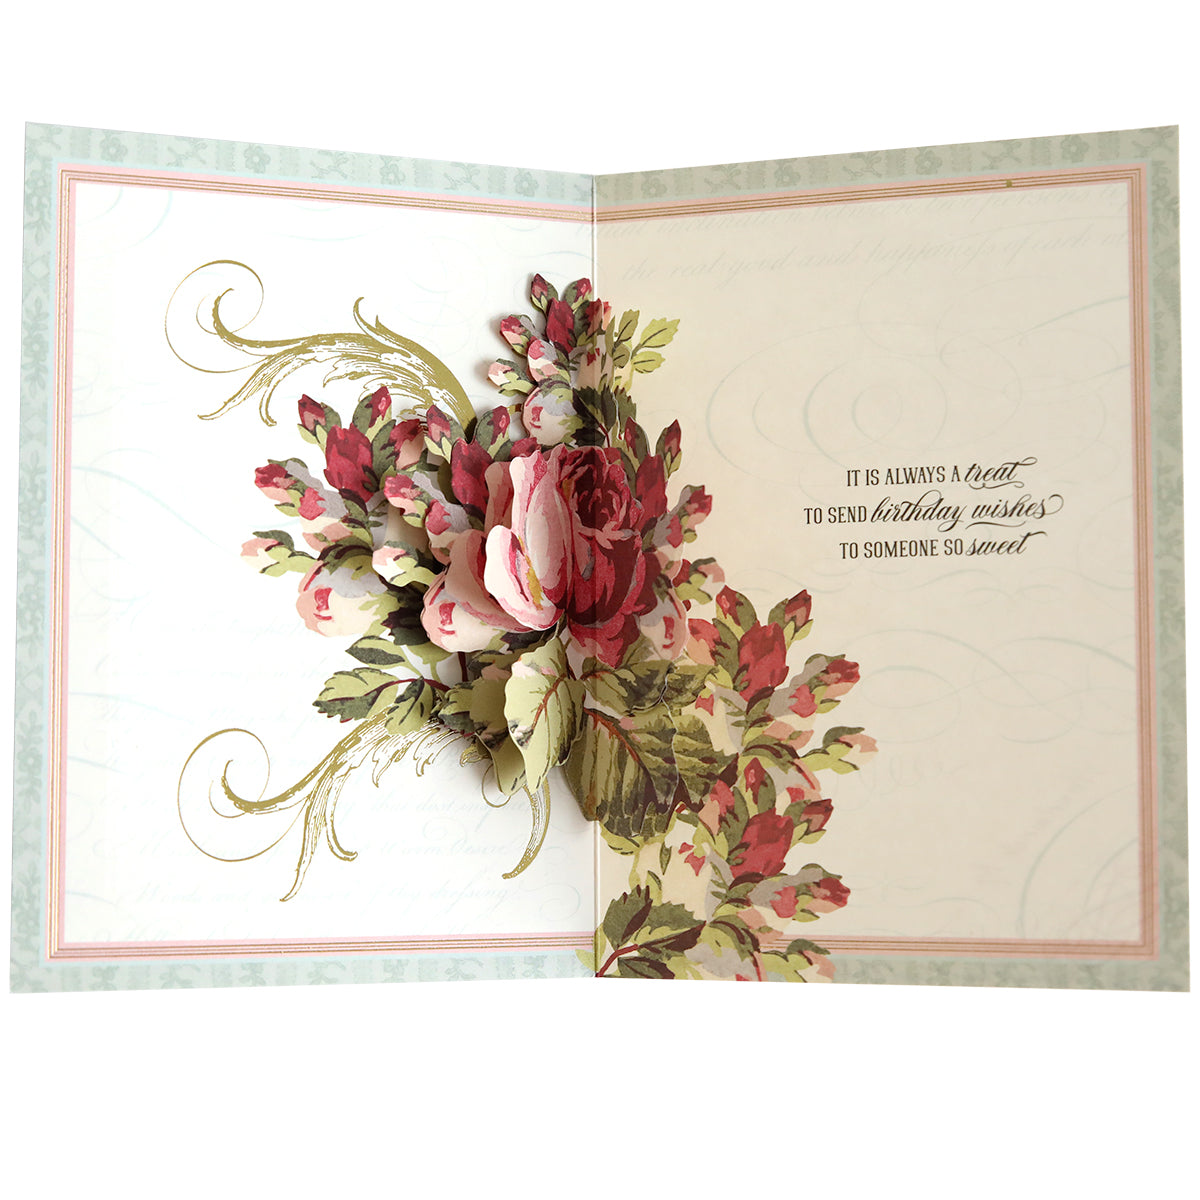 An open greeting card crafted with the Folded Flower Birthday Card Kit, featuring a floral bouquet design and the words "It is always nice to send birthday wishes to someone so sweet.